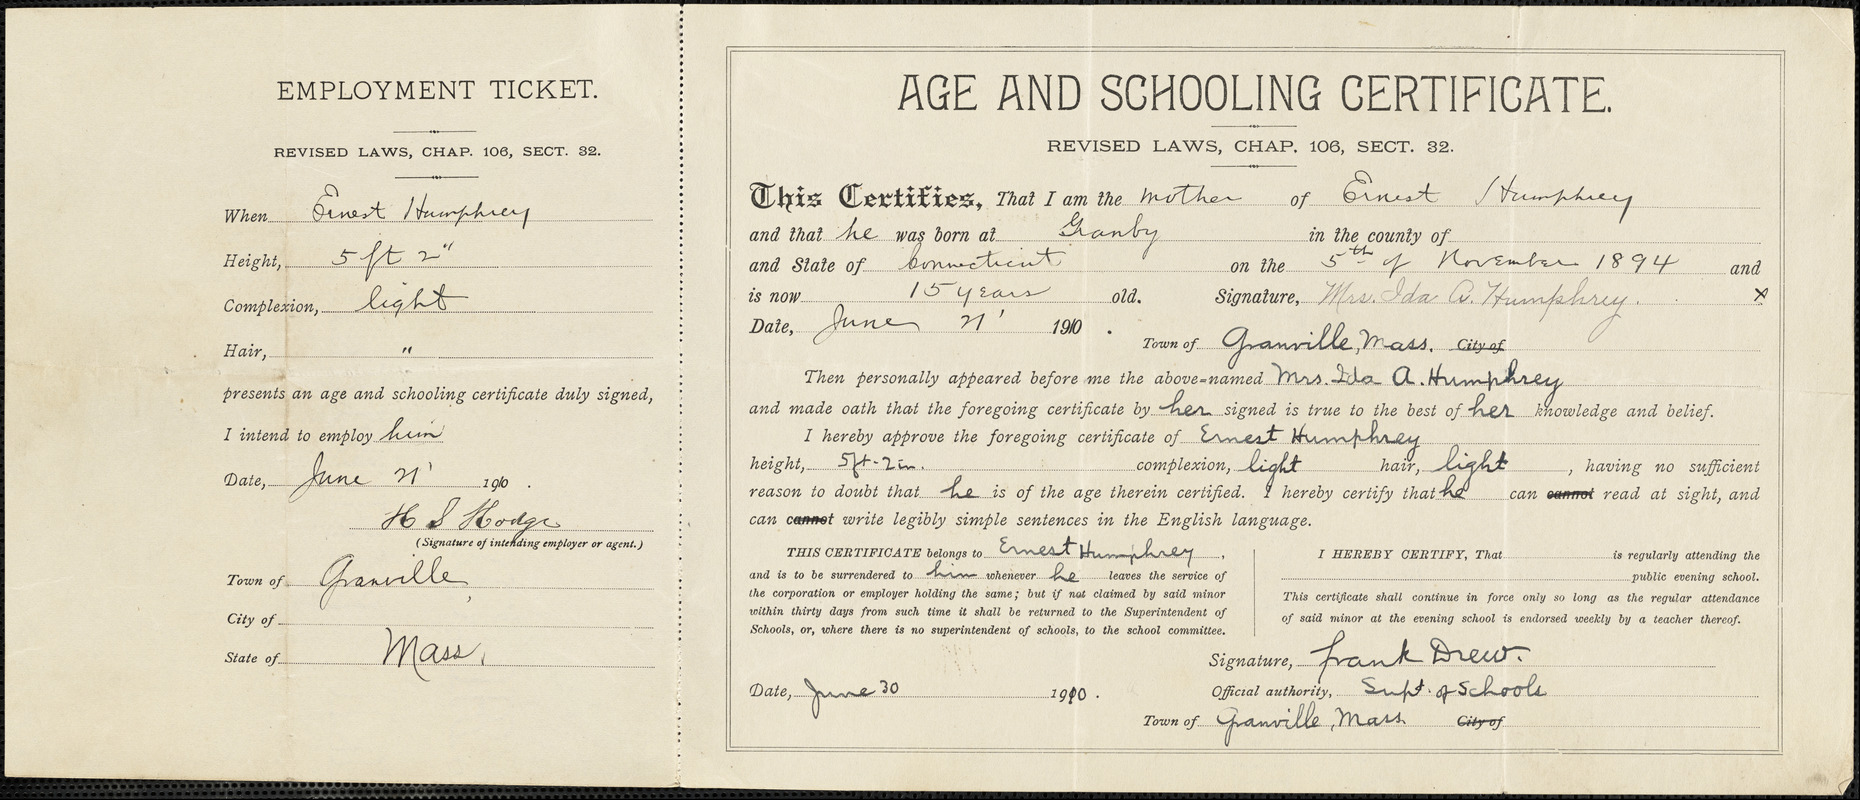 Age and schooling certificate, Ernest Humphrey